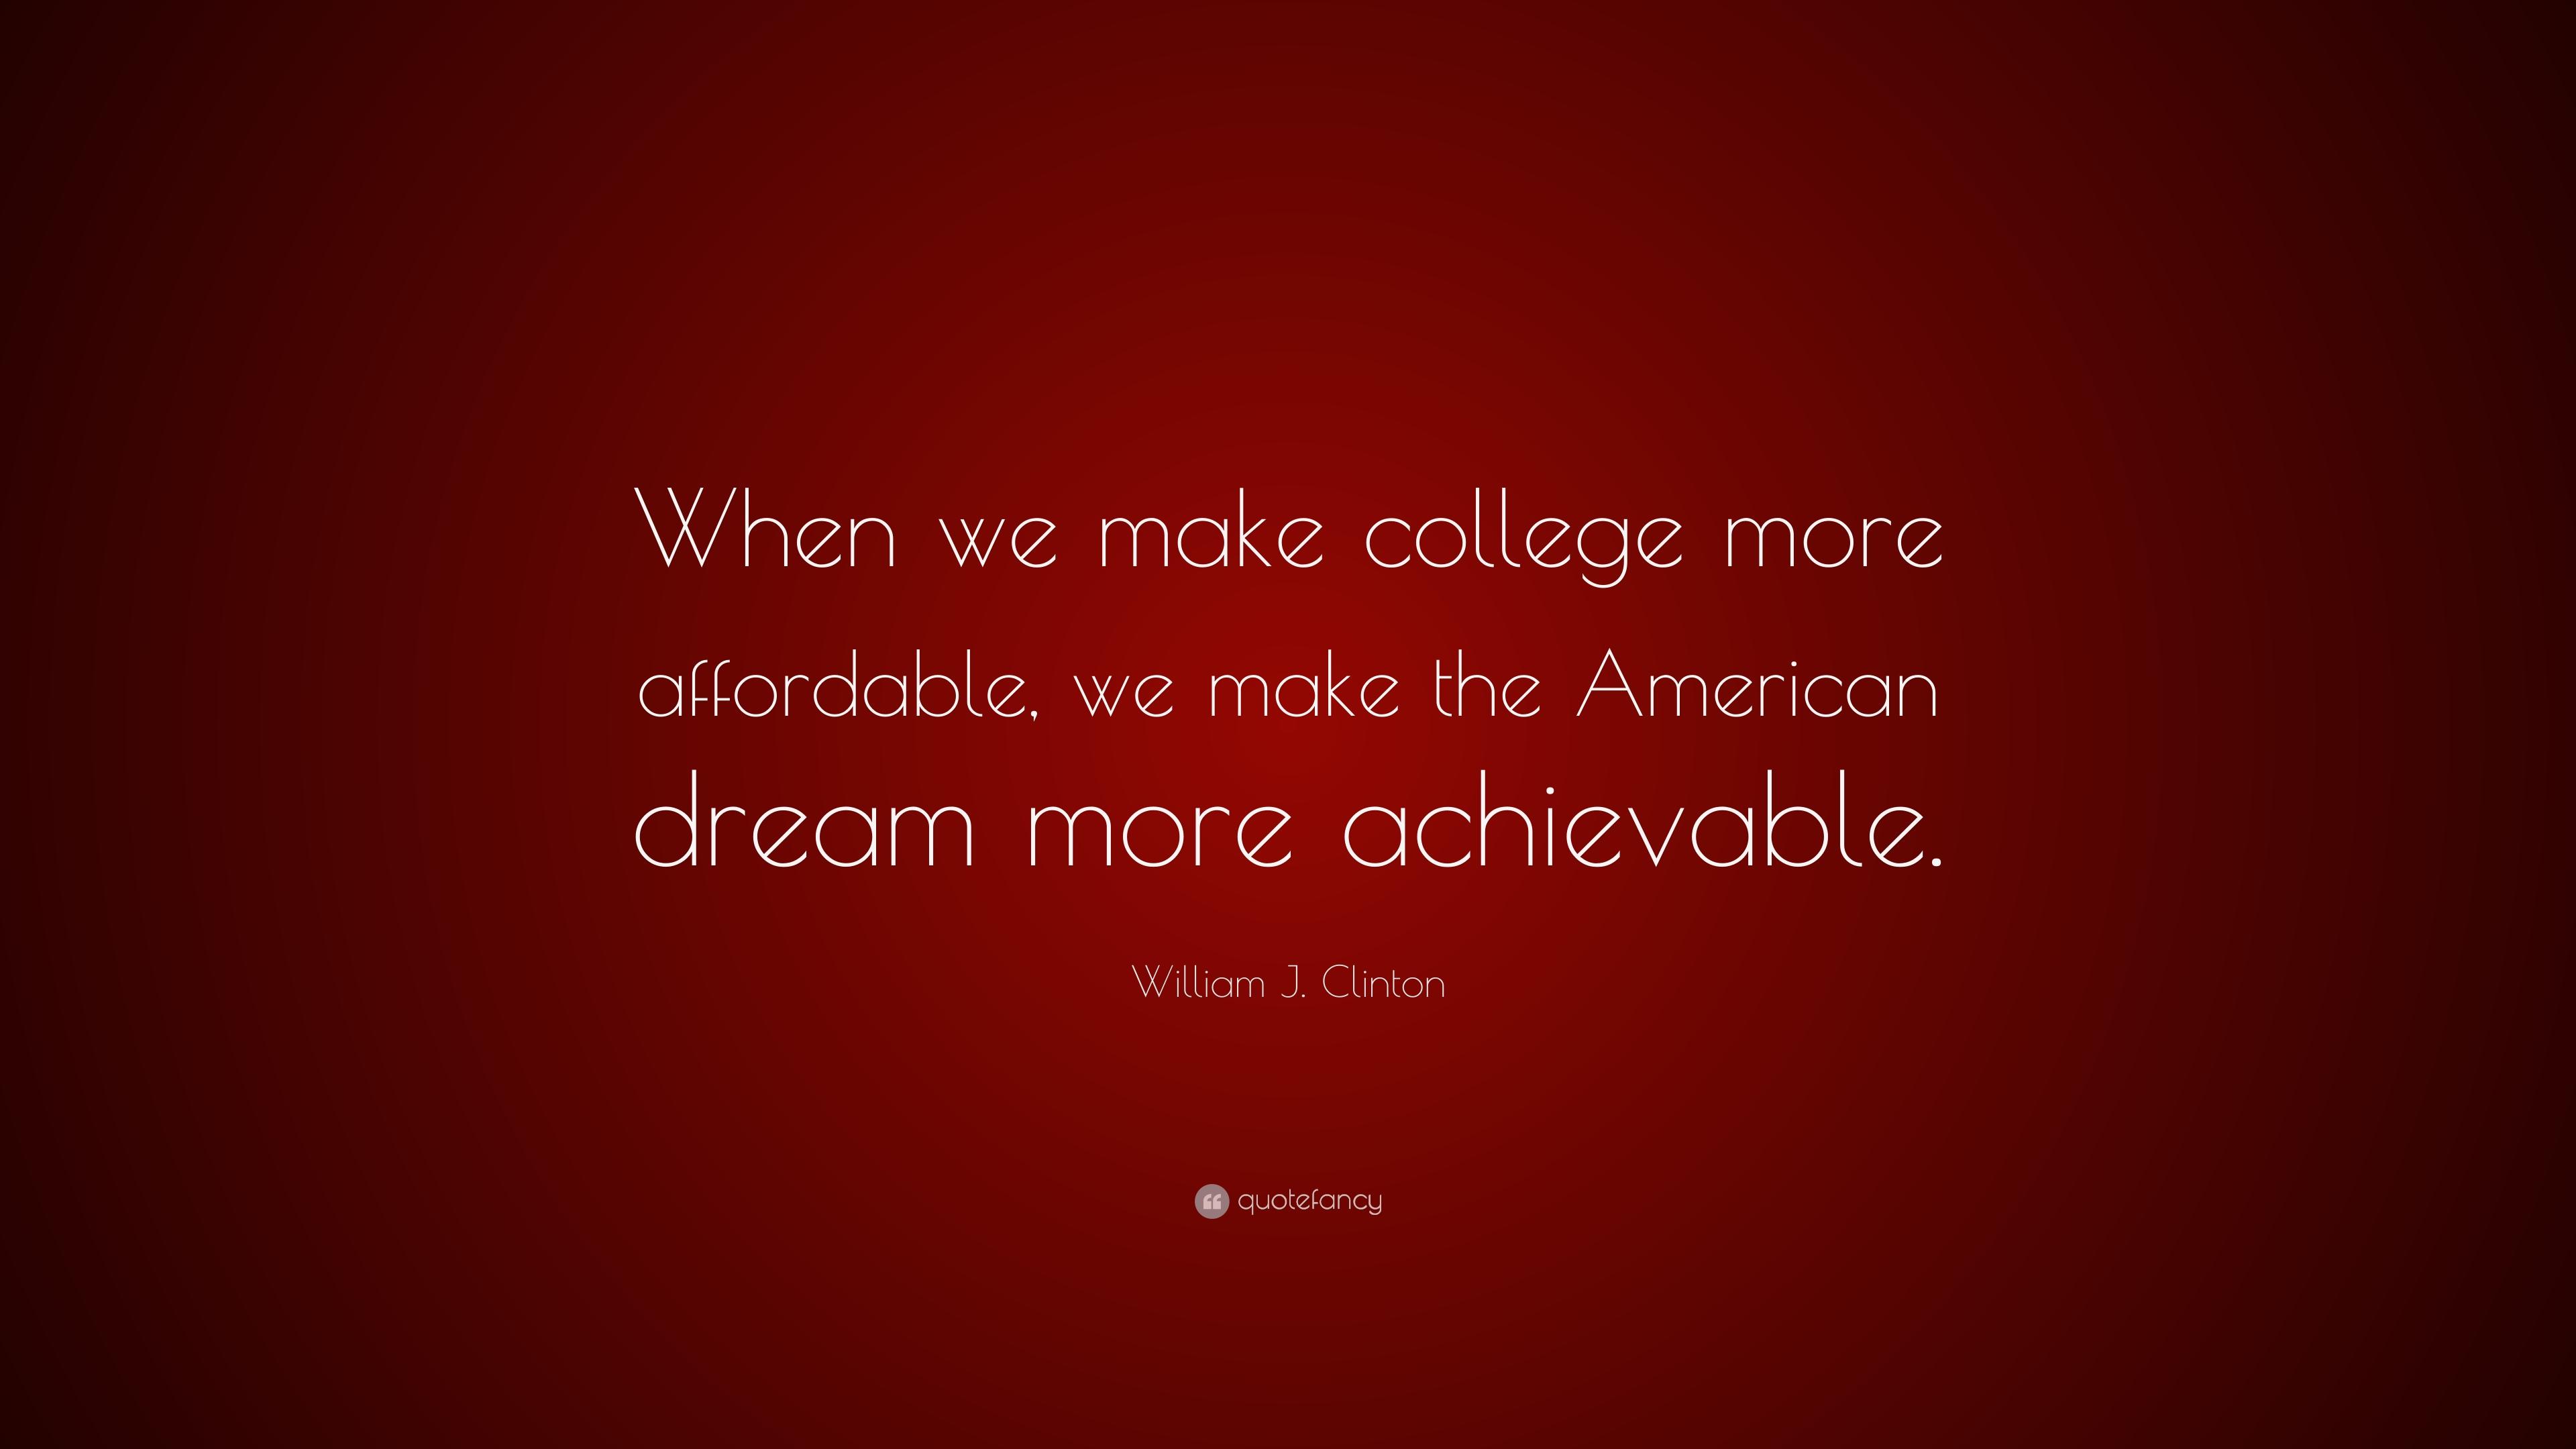 William J. Clinton Quote: “When we make college more affordable, we